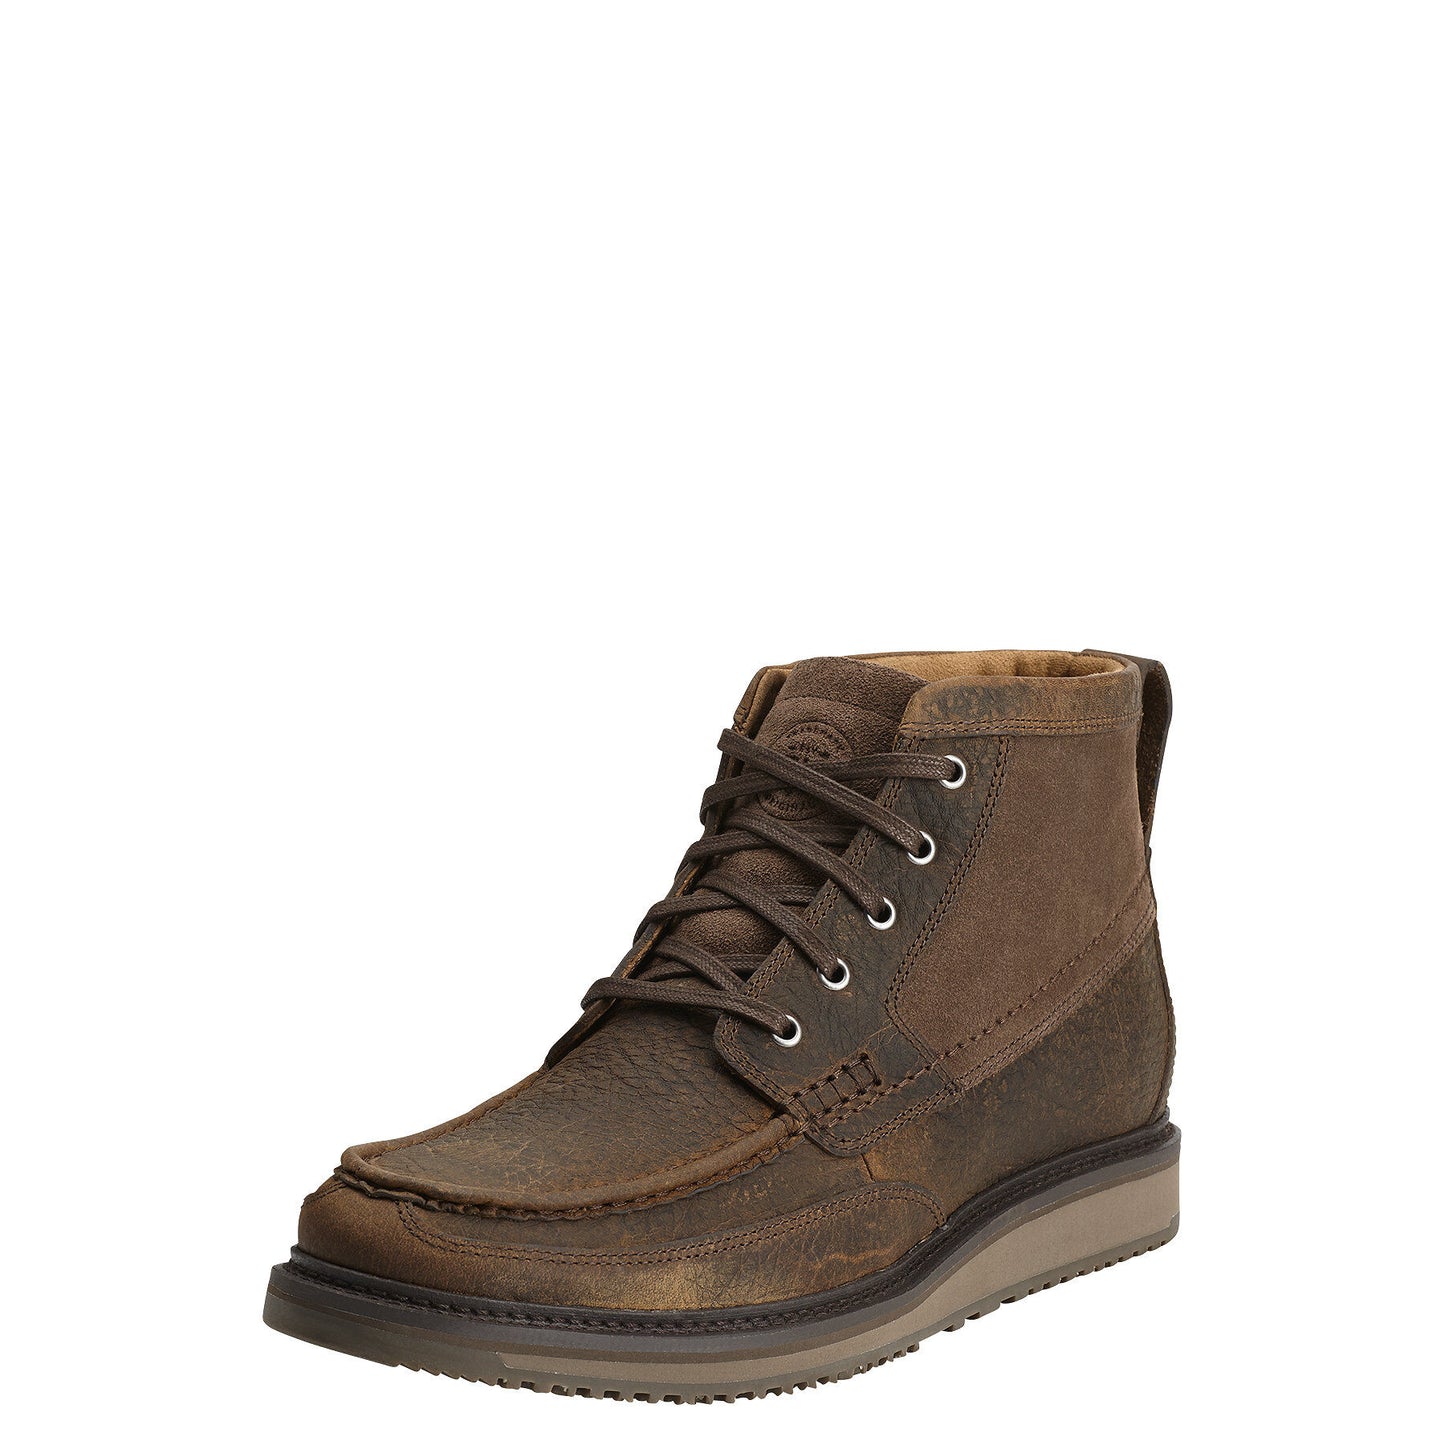 Ariat Men's Lookout Boot - Earth - French's Boots